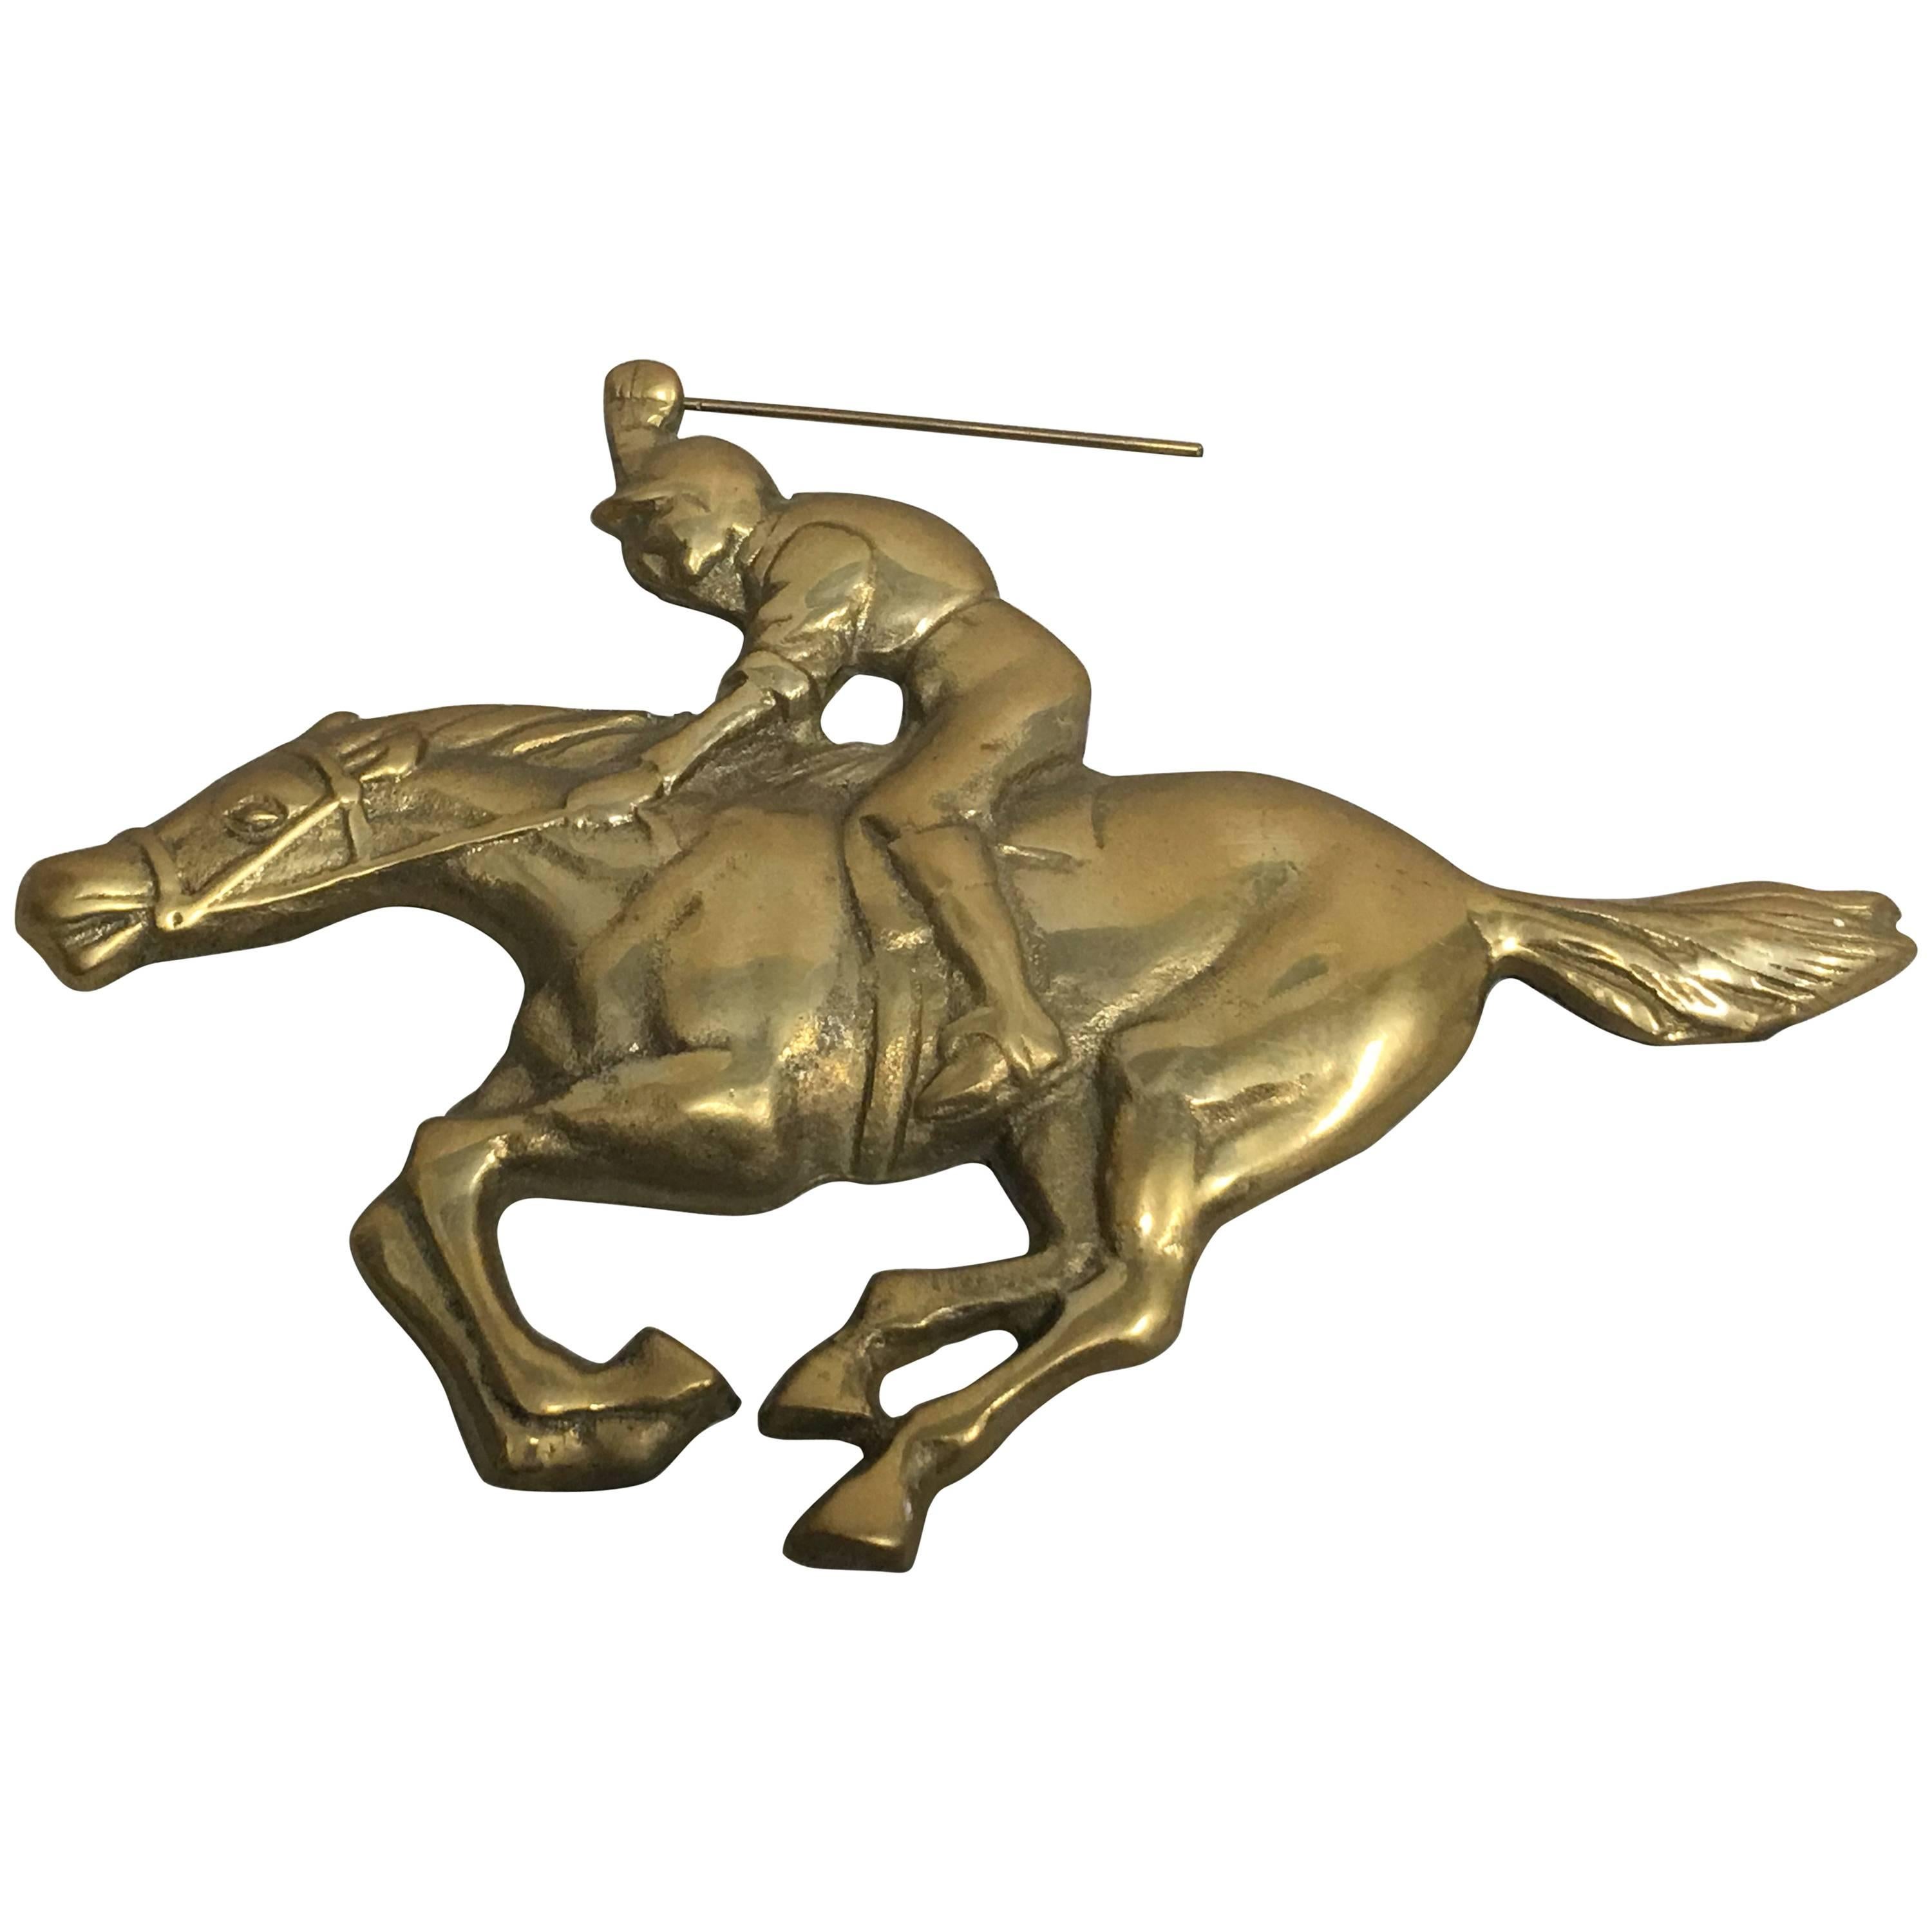 1960s Jockey and Horse Solid Brass Wall Plaque Sculpture